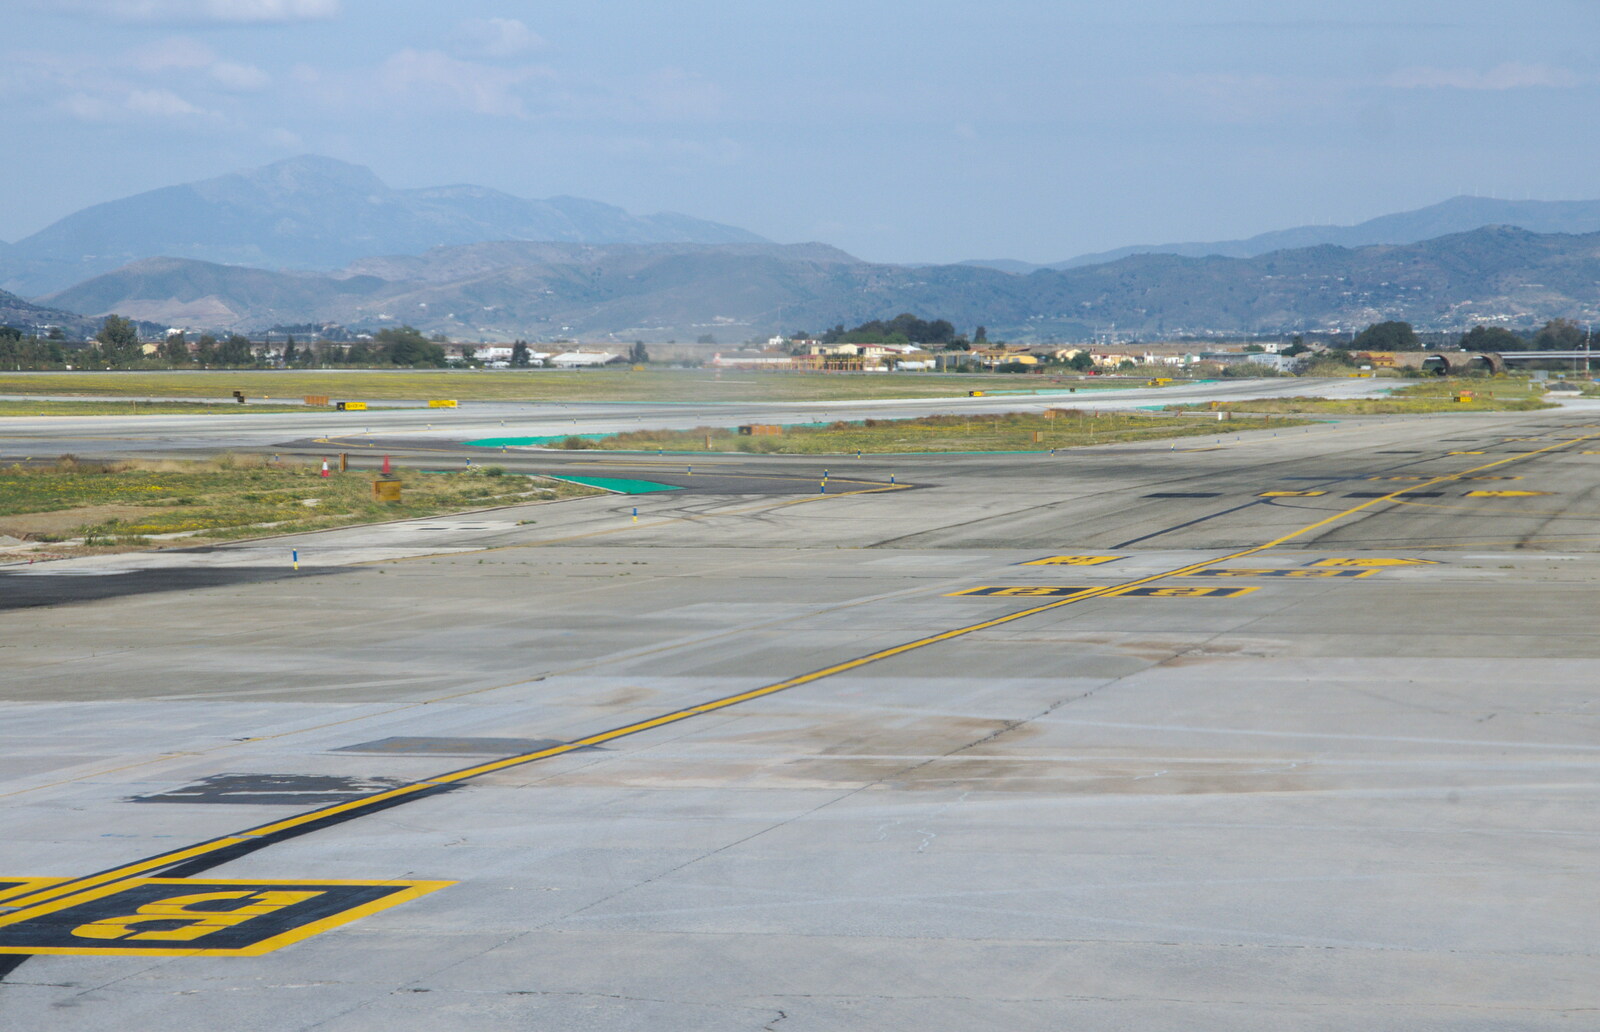 The sunny tarmac of Málaga airport from An Easter Parade, Nerja, Andalusia, Spain - 21st April 2019